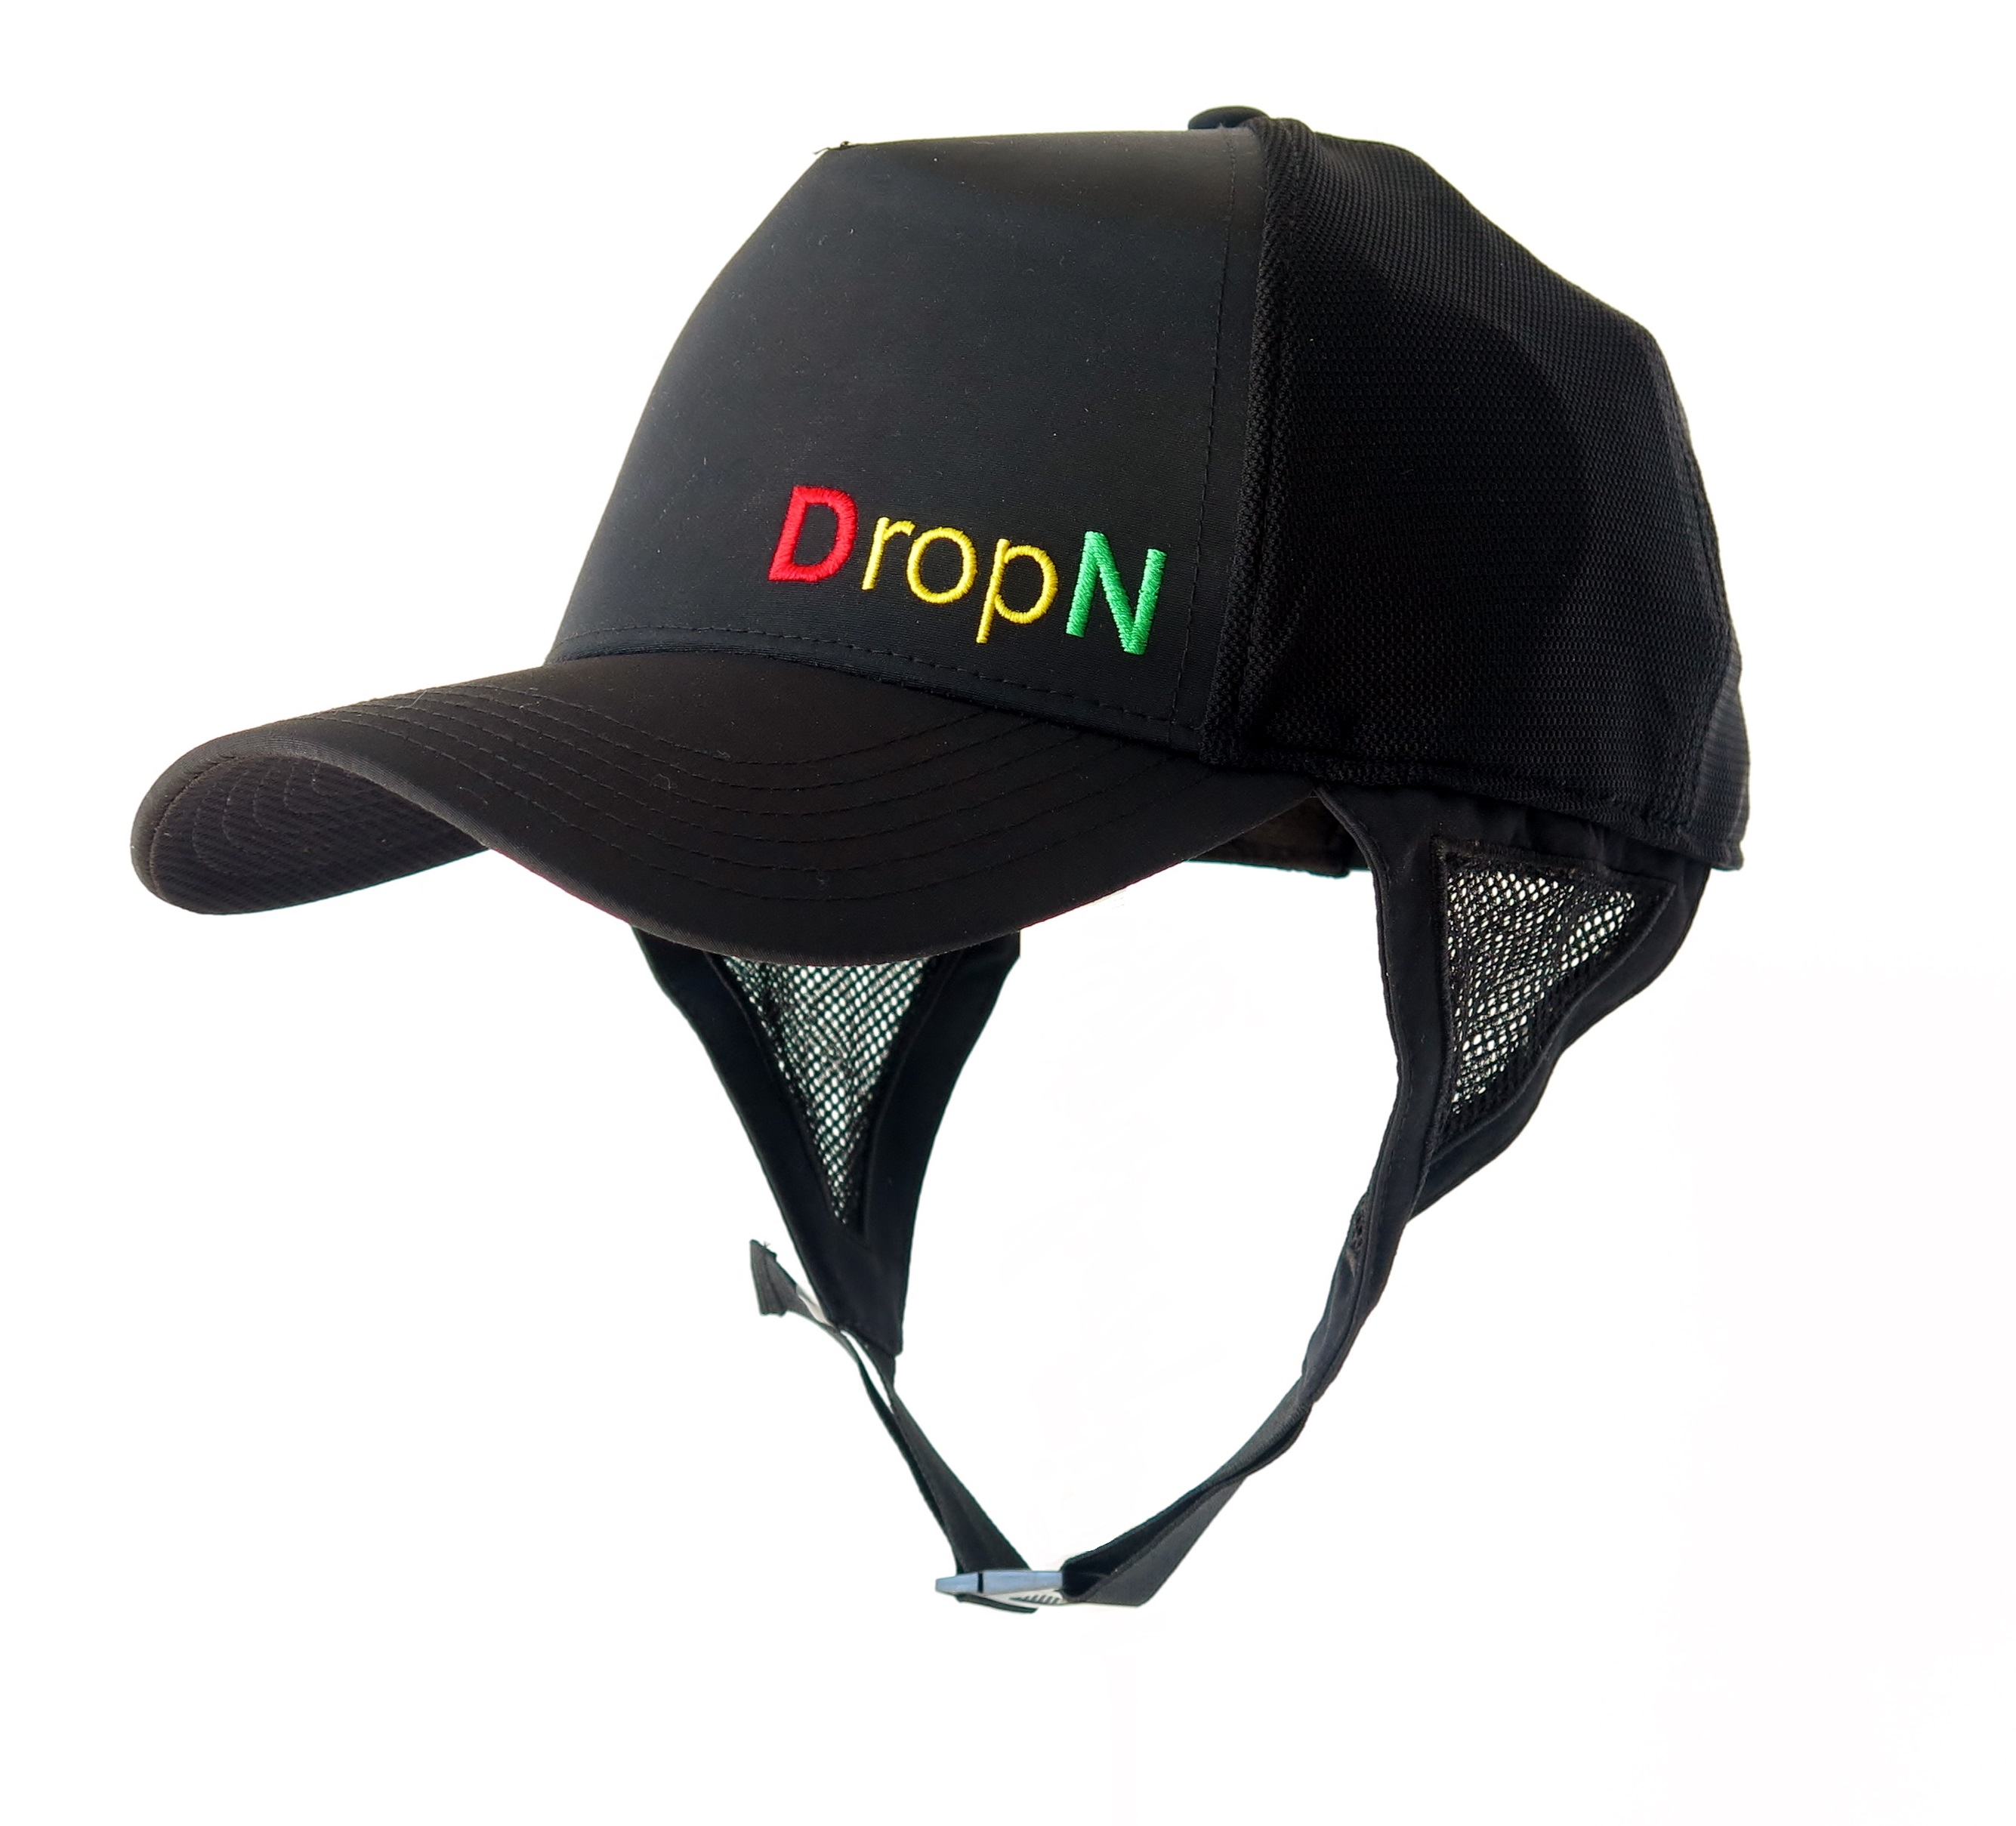 Strap DropN and Hat Logo - Rasta Surf Surf DropN™ with Surf Gear - - Apparel Chin